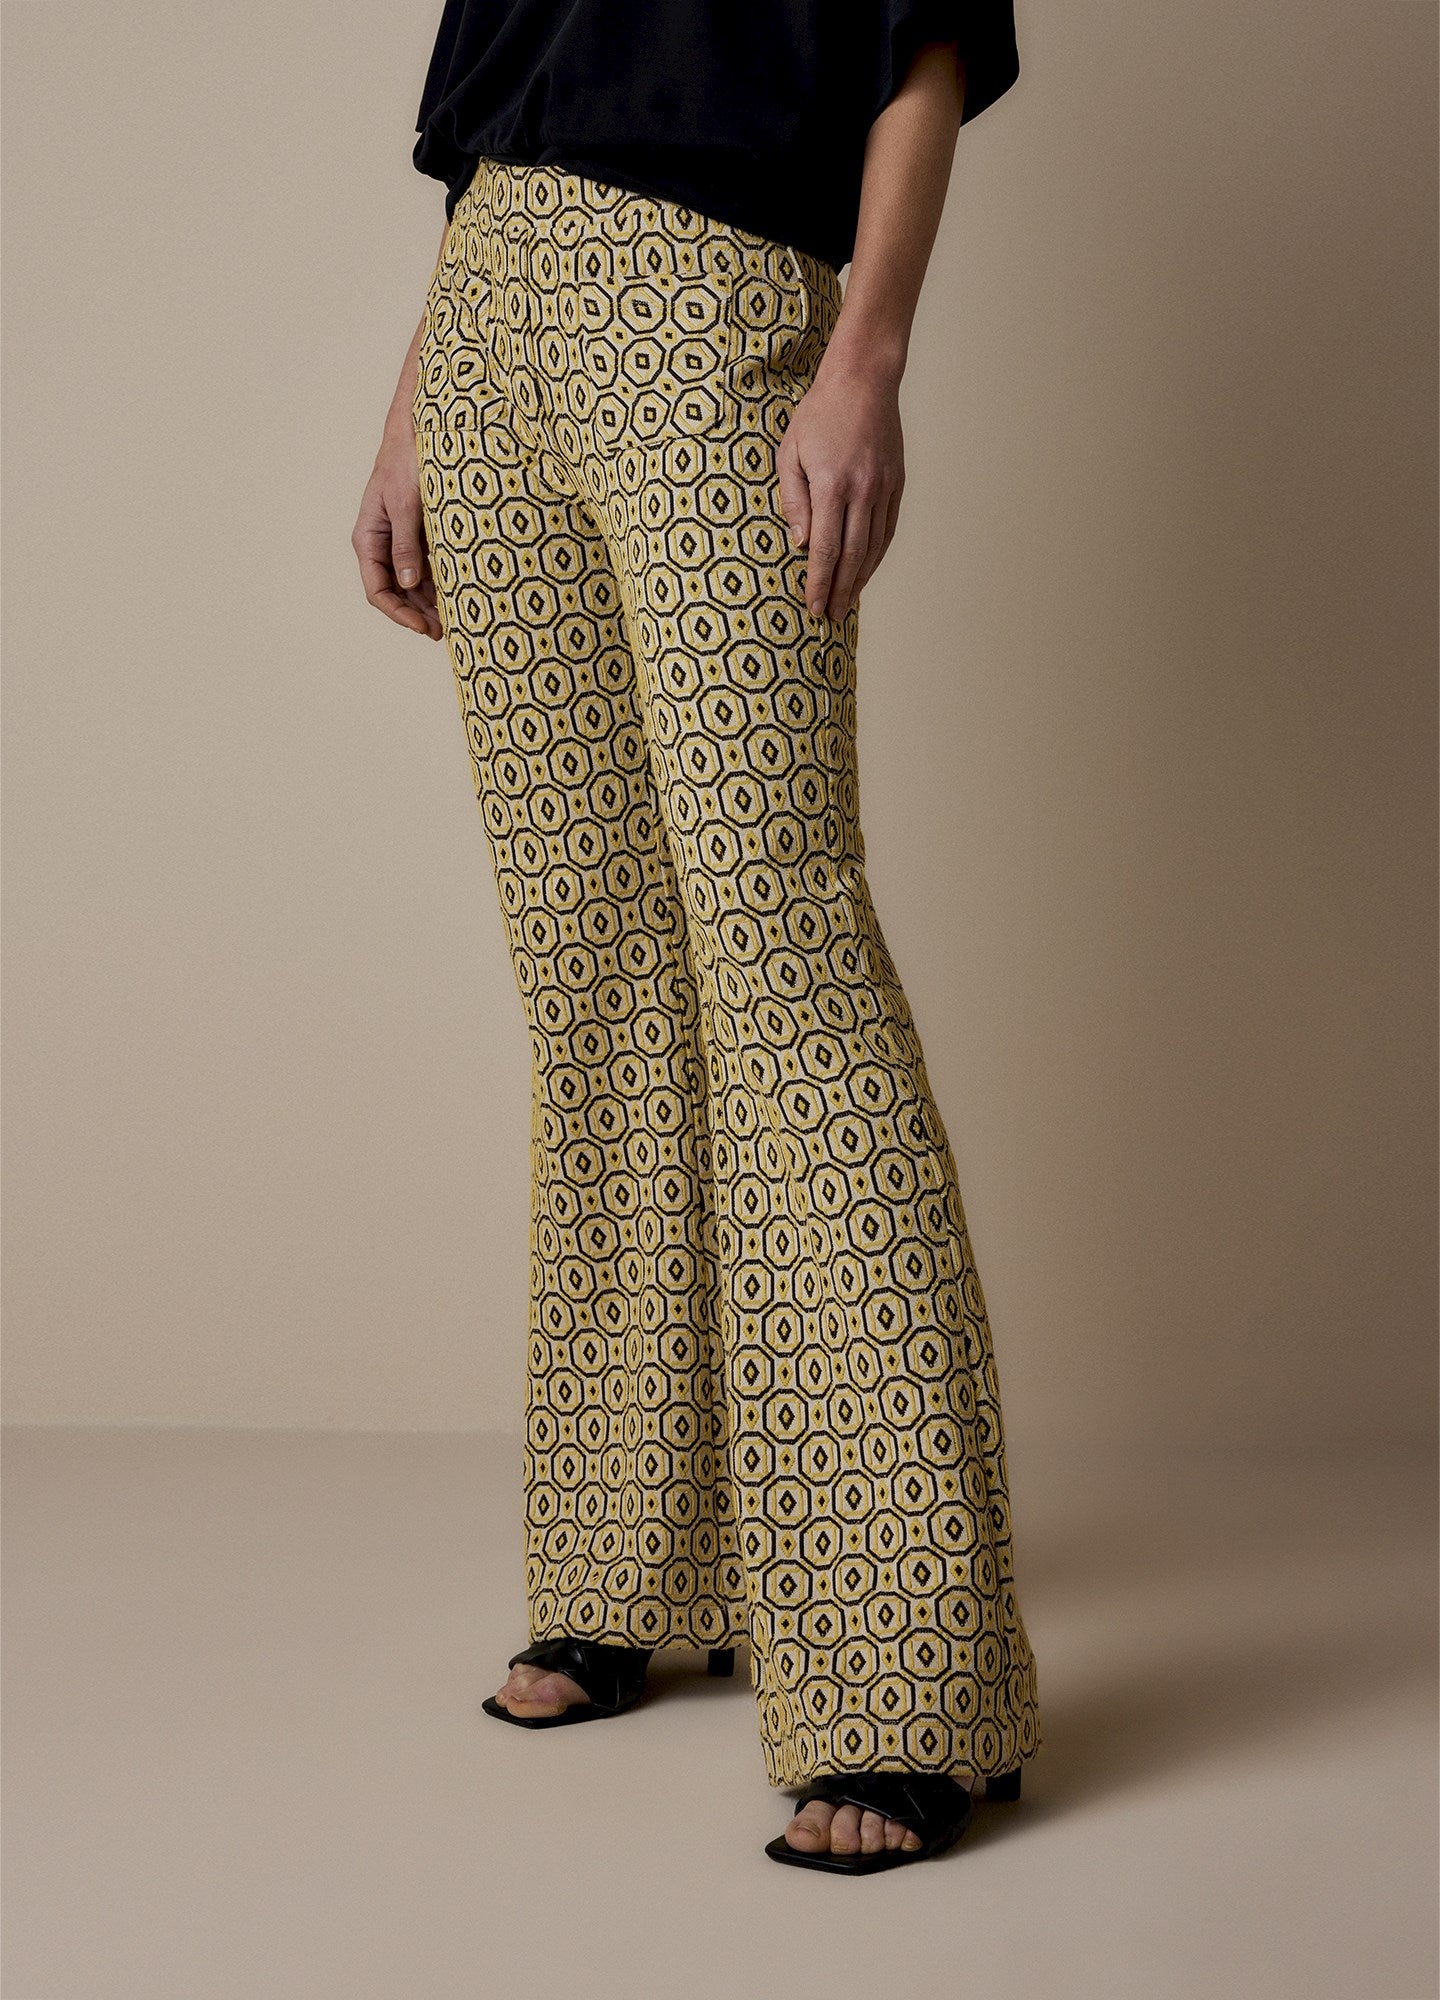 Clarence Green Print Jacquard Trousers  Libby London